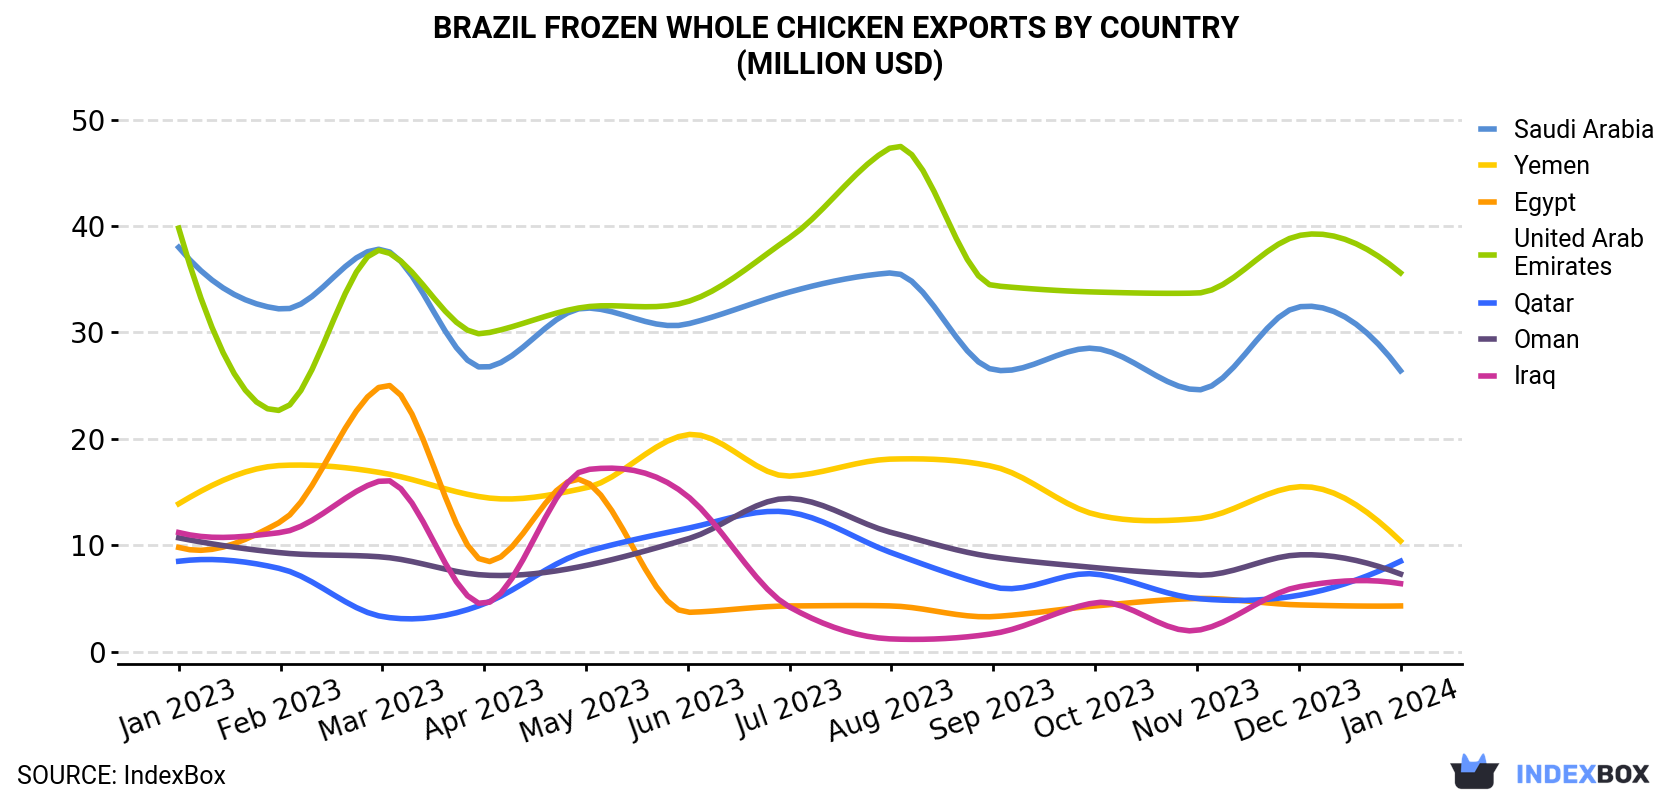 Brazil Frozen Whole Chicken Exports By Country (Million USD)